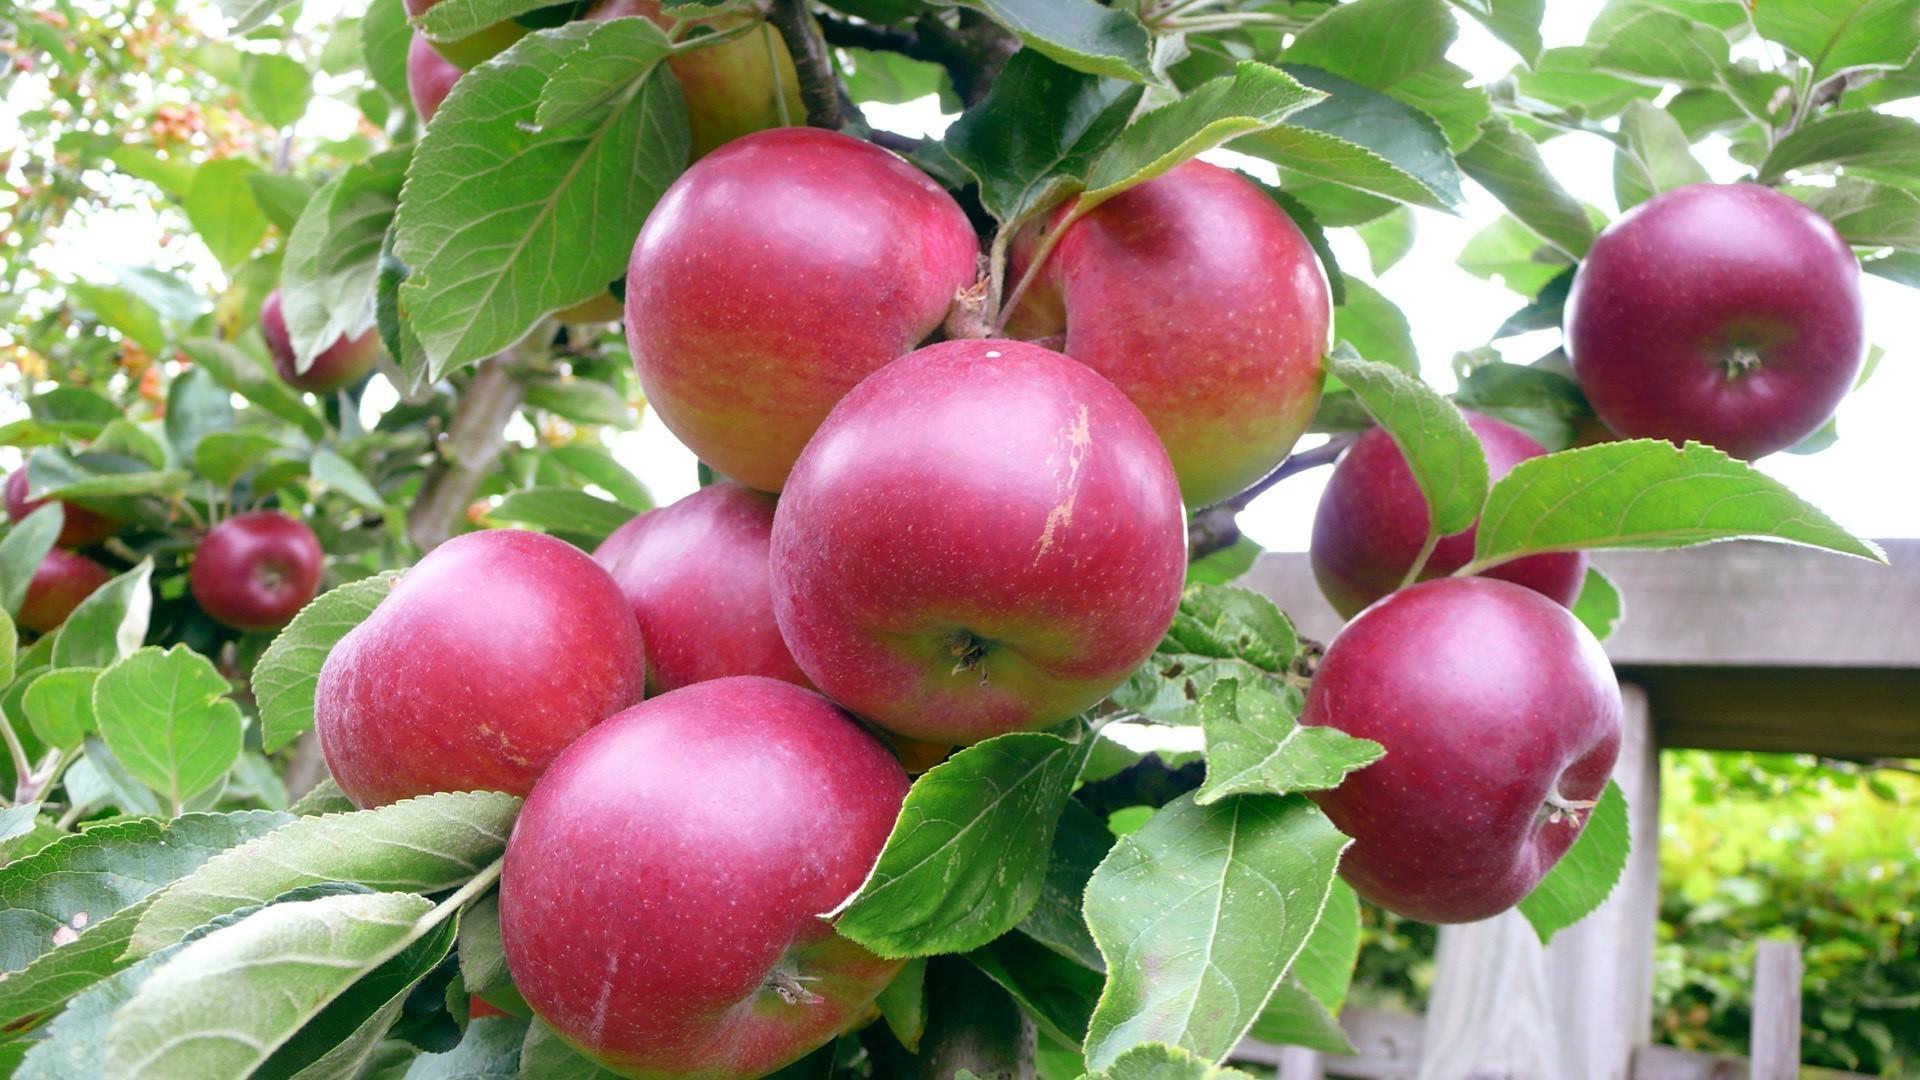 Red apples on the Apple tree. Android wallpaper for free